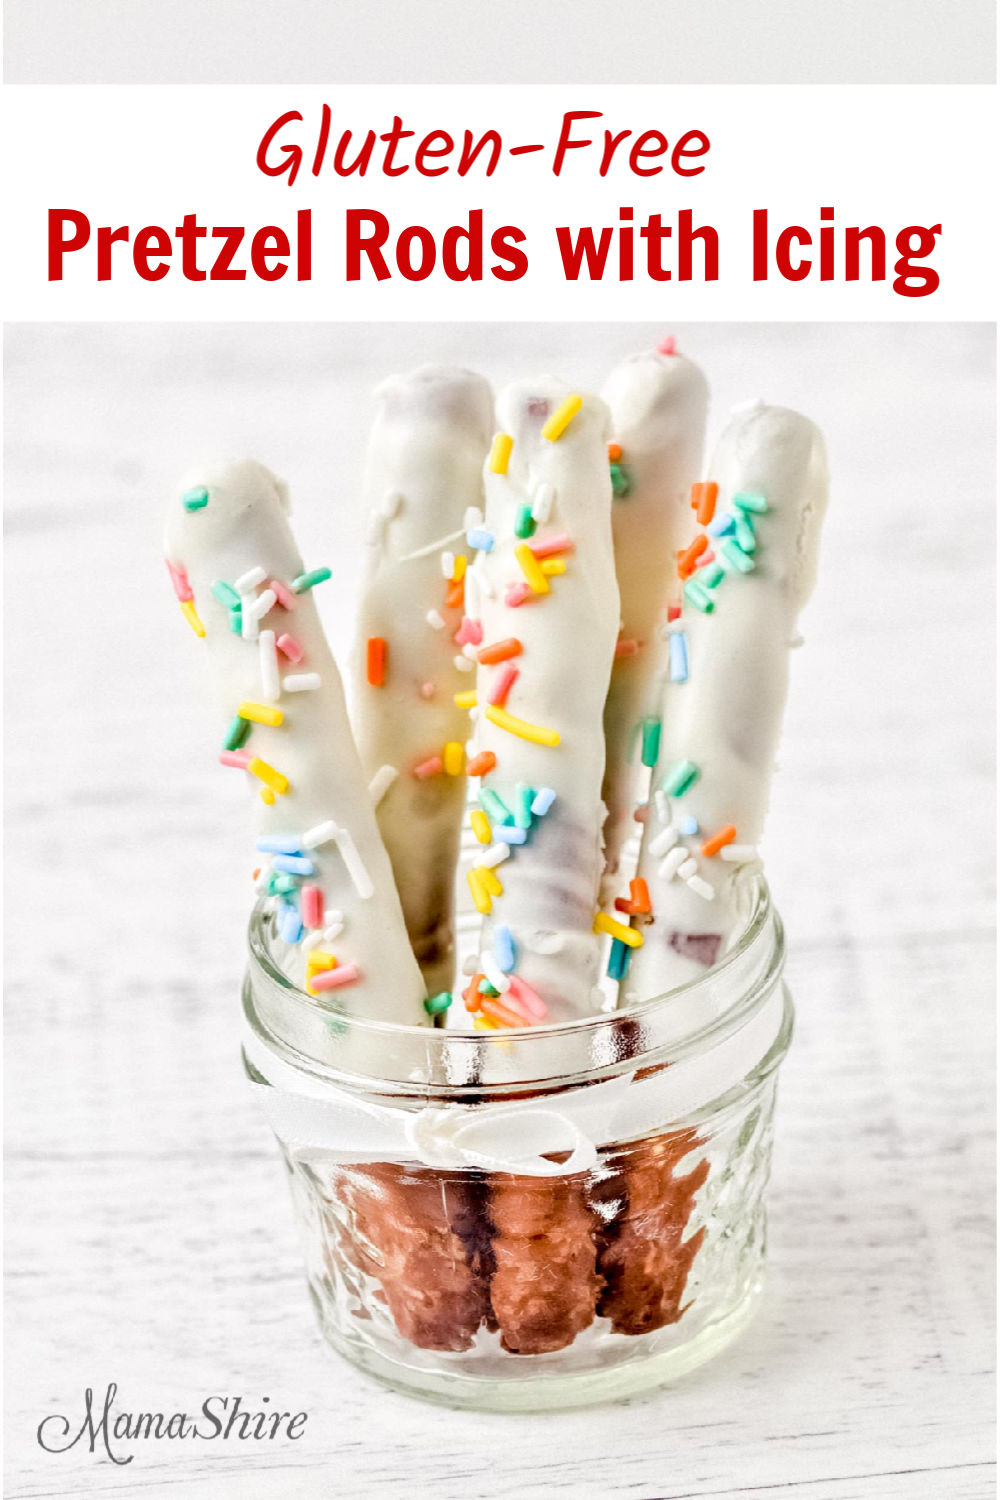 A jar of gluten-free pretzel rods with icing and it's dairy-free.